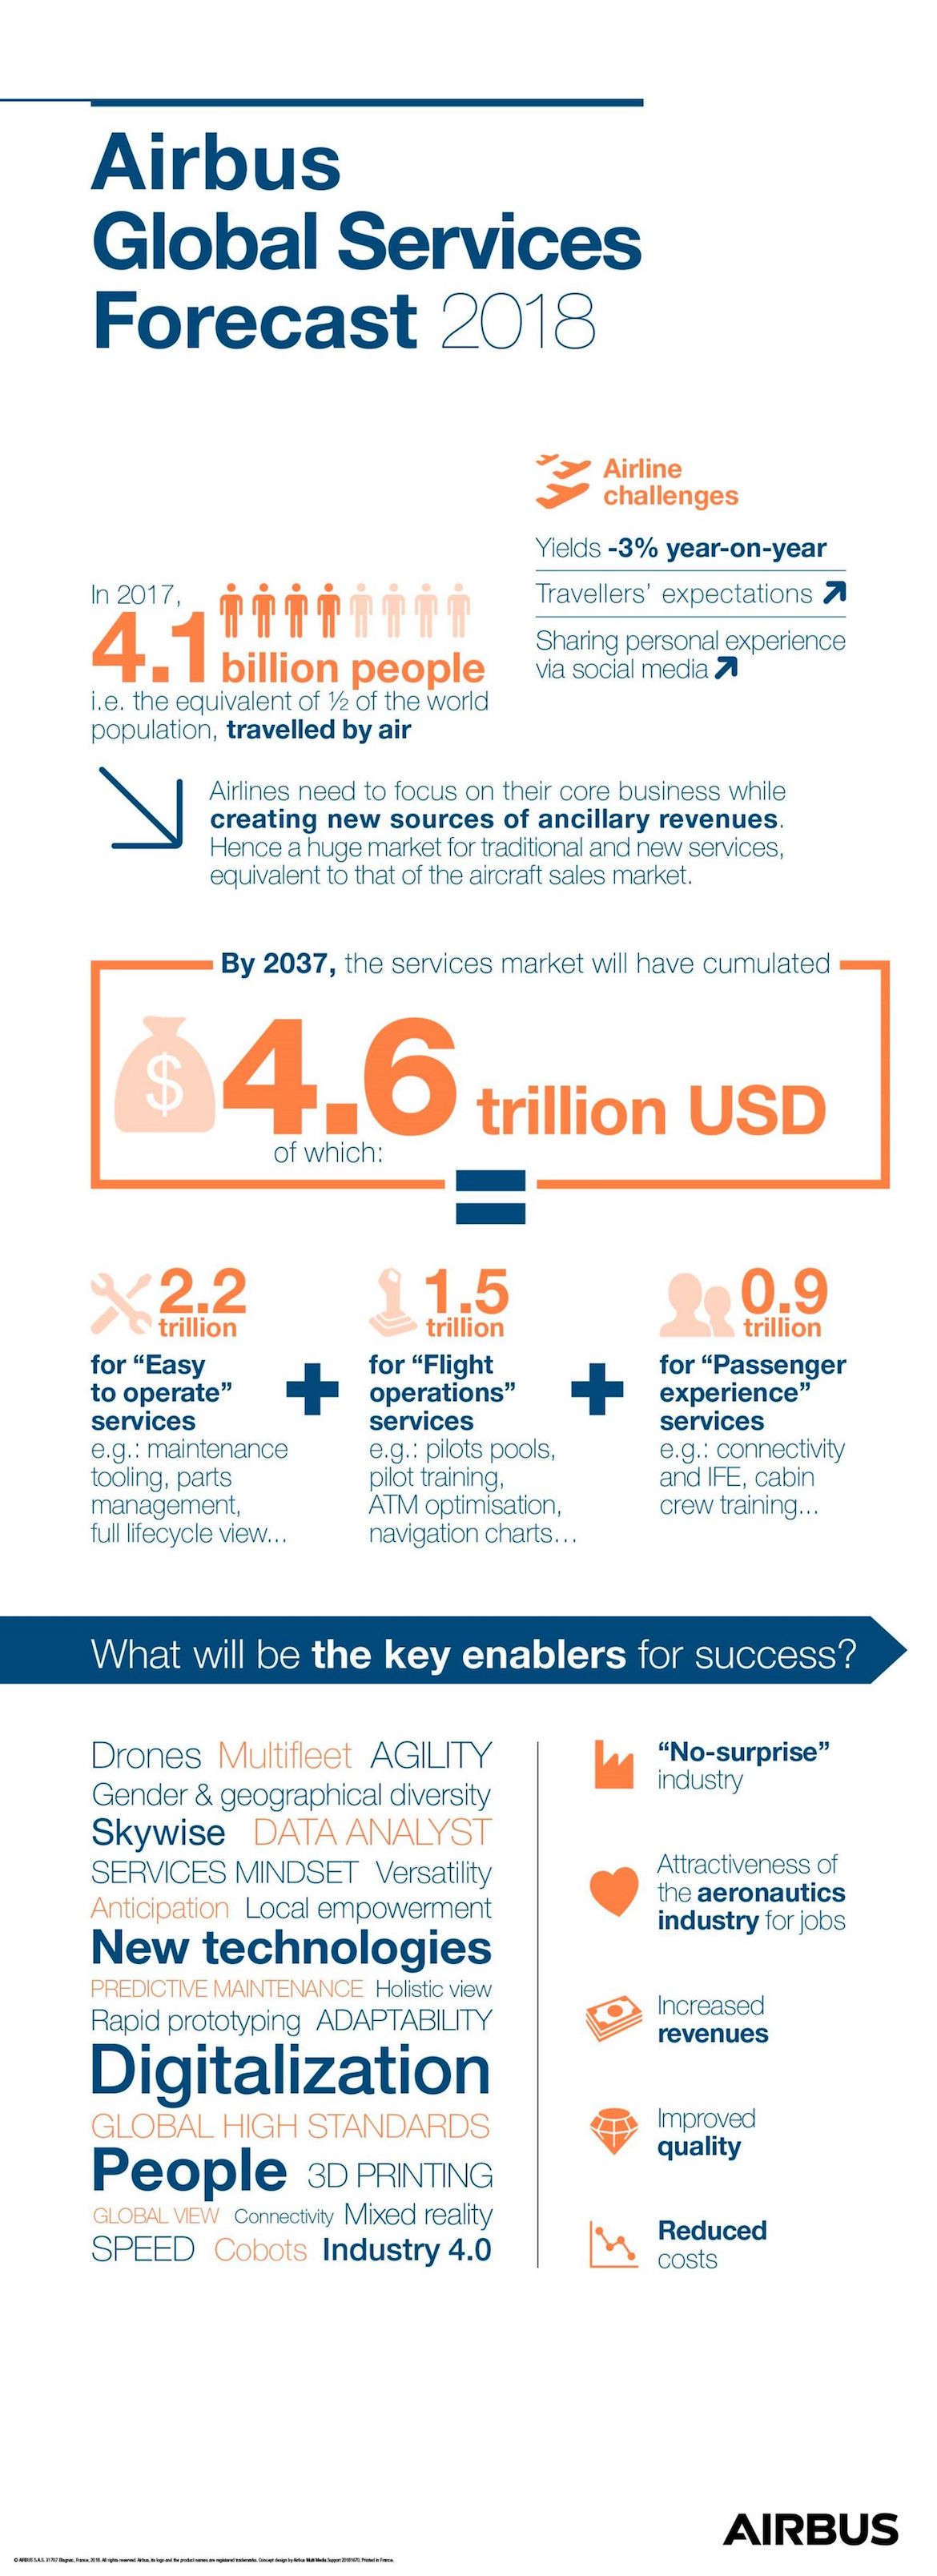 An Airbus infographic on its Global Services Forecast. (Airbus)